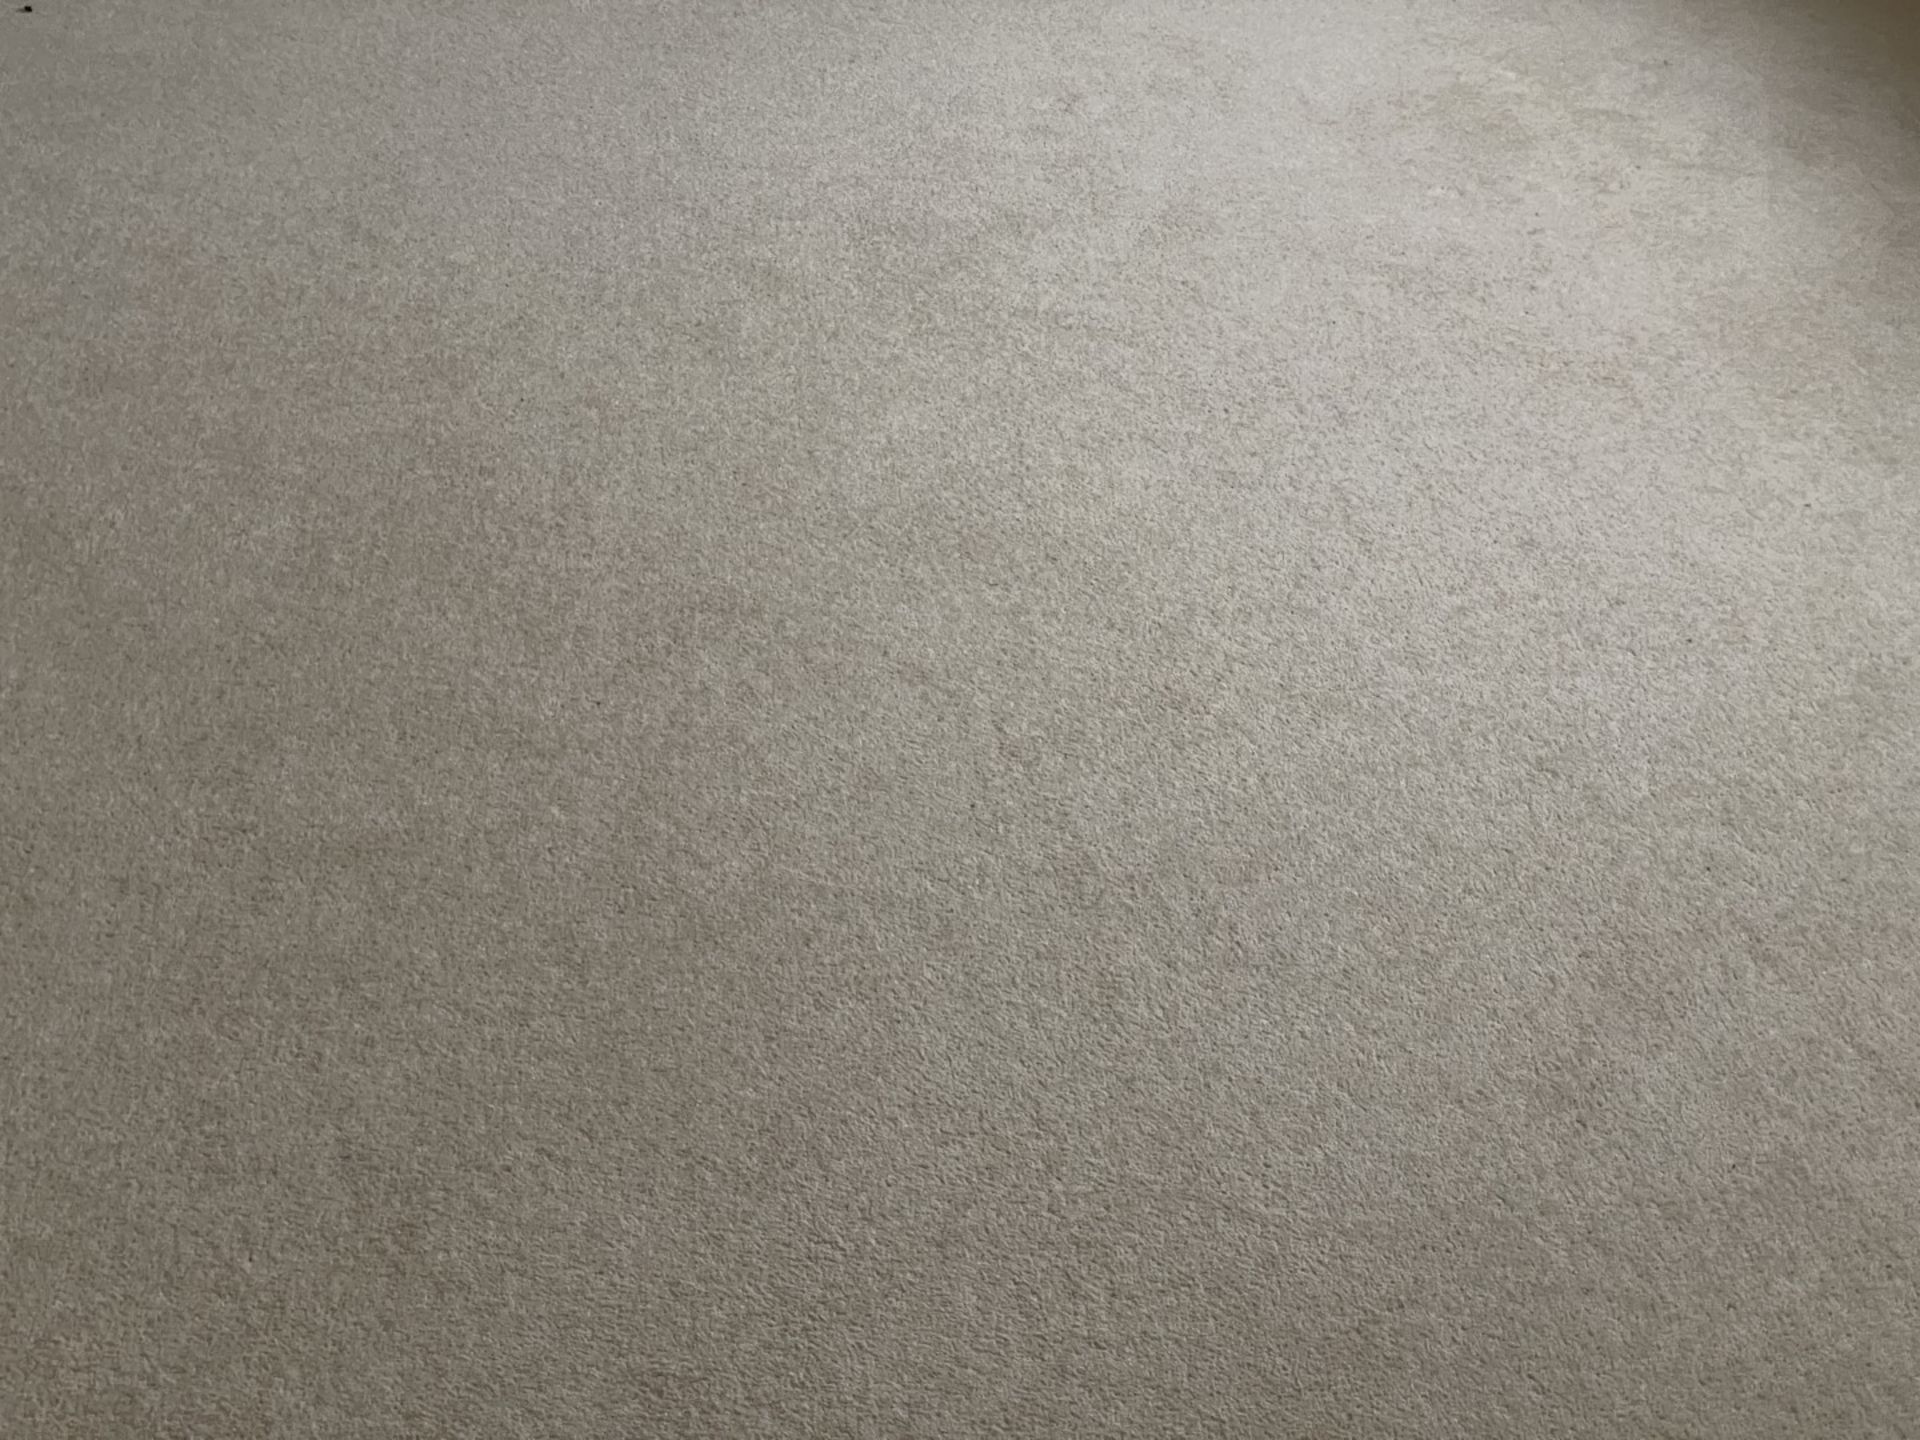 1 x Luxury Wool Back Bedroom Carpet in a Neutral Tone with Premium Underlay - Image 9 of 16